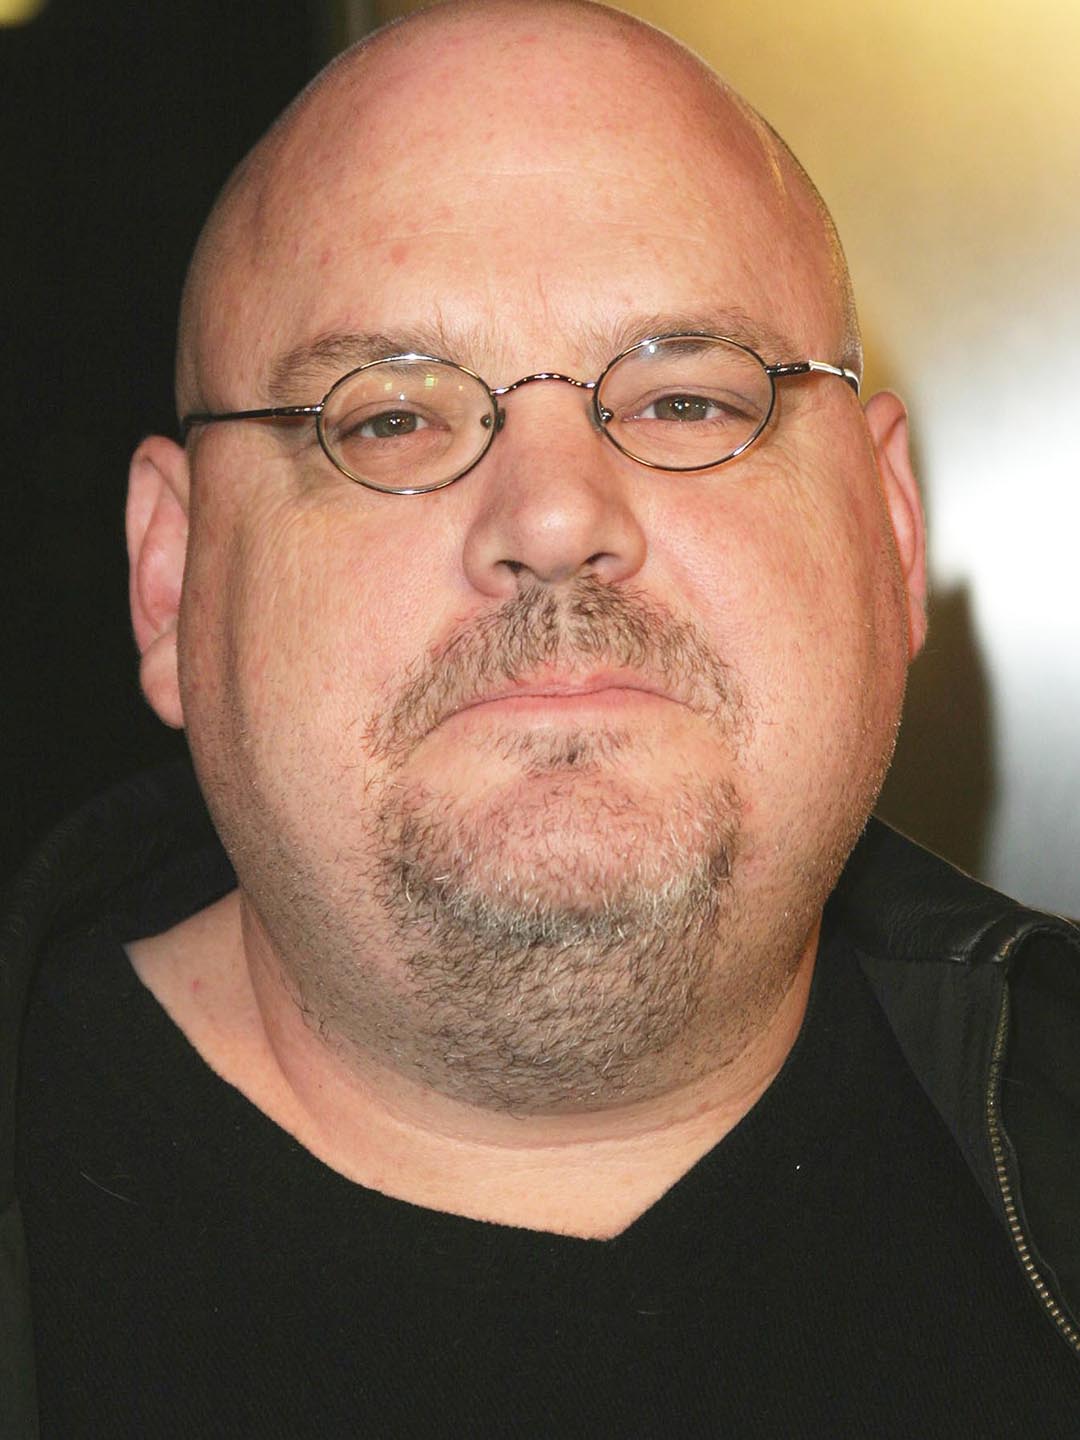 How tall is Pruitt Taylor Vince?